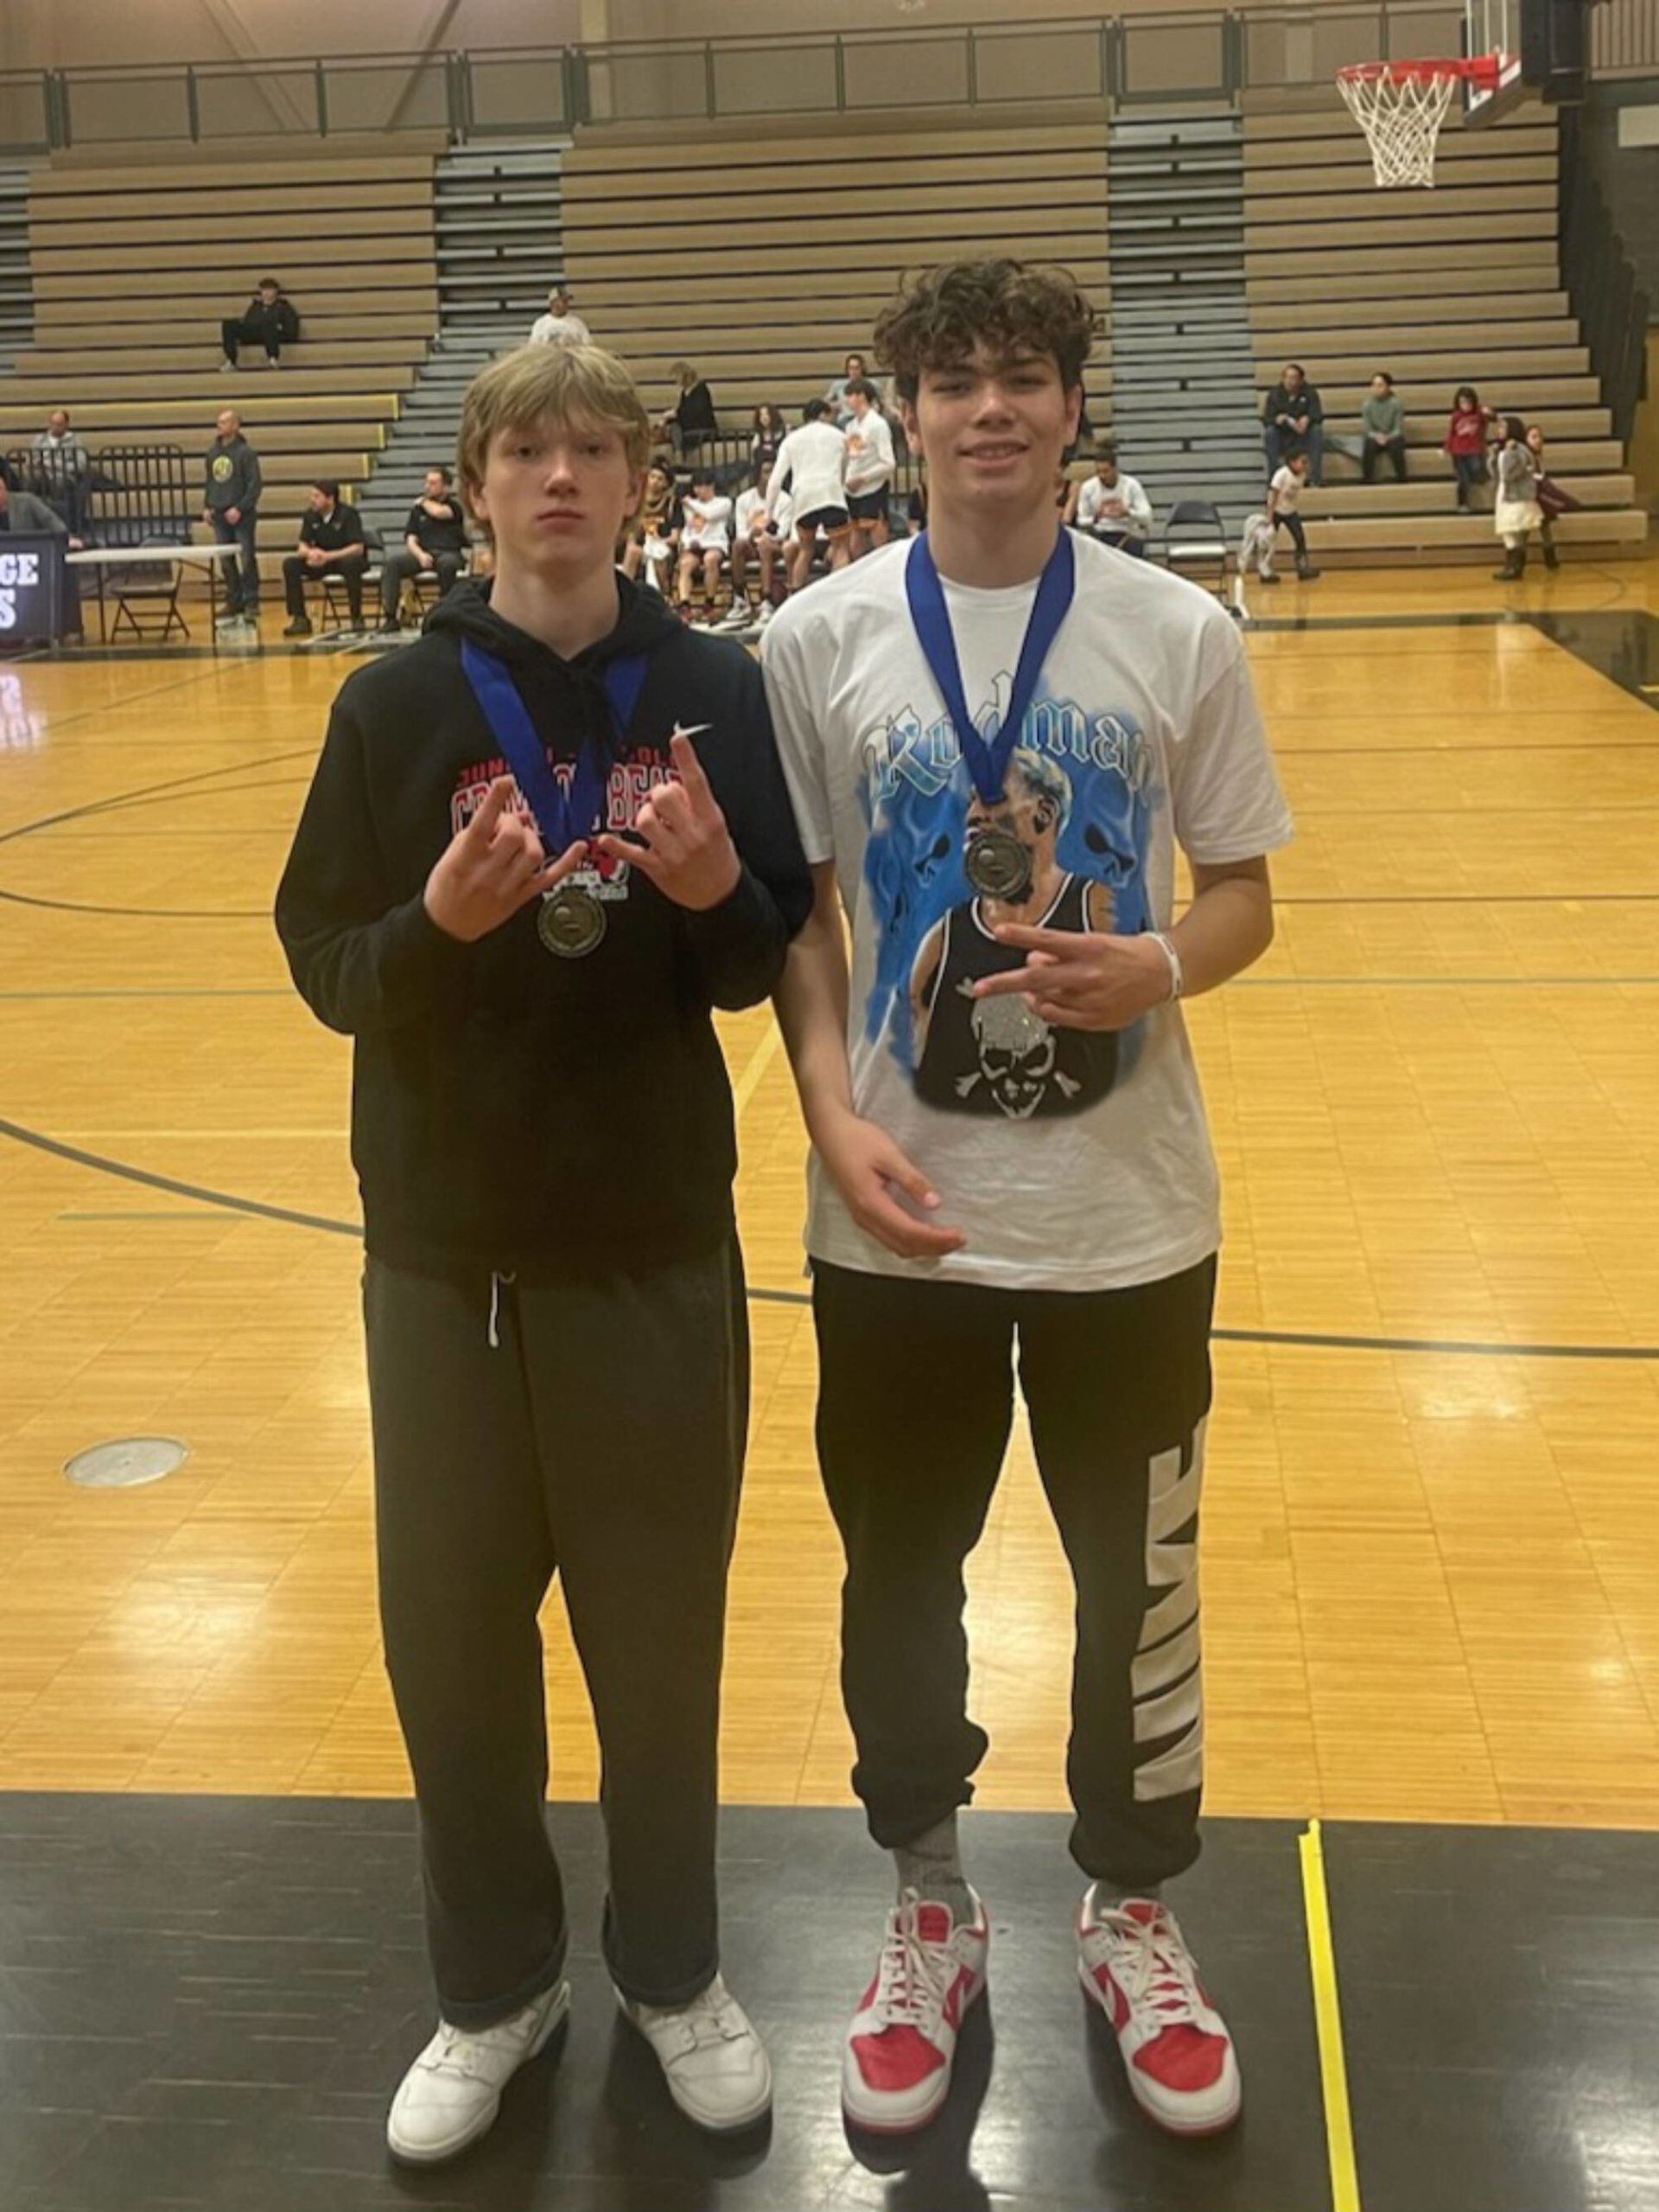 Courtesy Photo / Robert Casperson 
JDHS junior Sean Oliver and senior Orion Dybdahl pose for a photo on Saturday after earning all-tournament honors at the O’Brady Invitational tournament in South Anchorage.